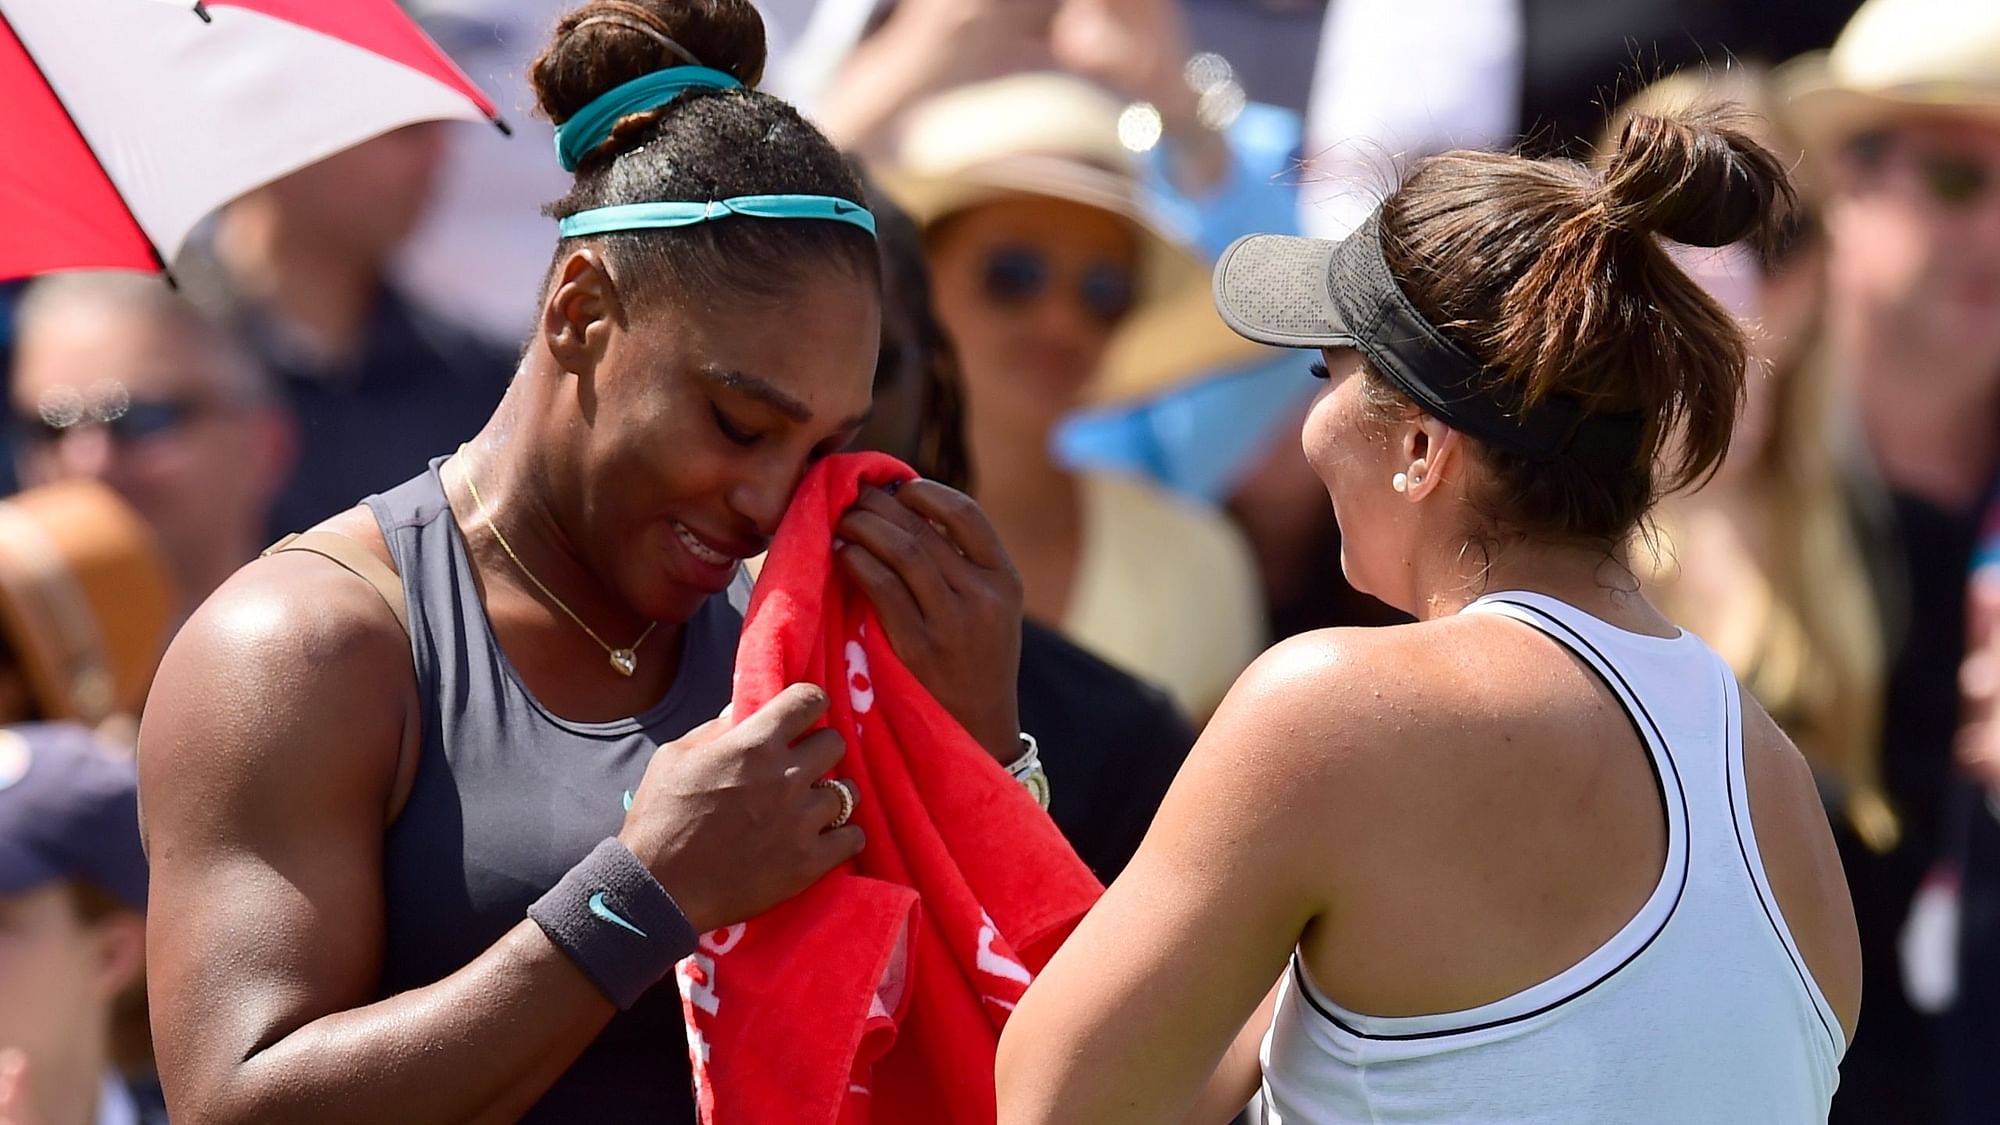 Canada’s Bianca Andreescu, right, consoles Serena Williams, of the United States, after Williams had to retire from the final of the Rogers Cup tennis tournament in Toronto, Sunday, Aug. 11, 2019.